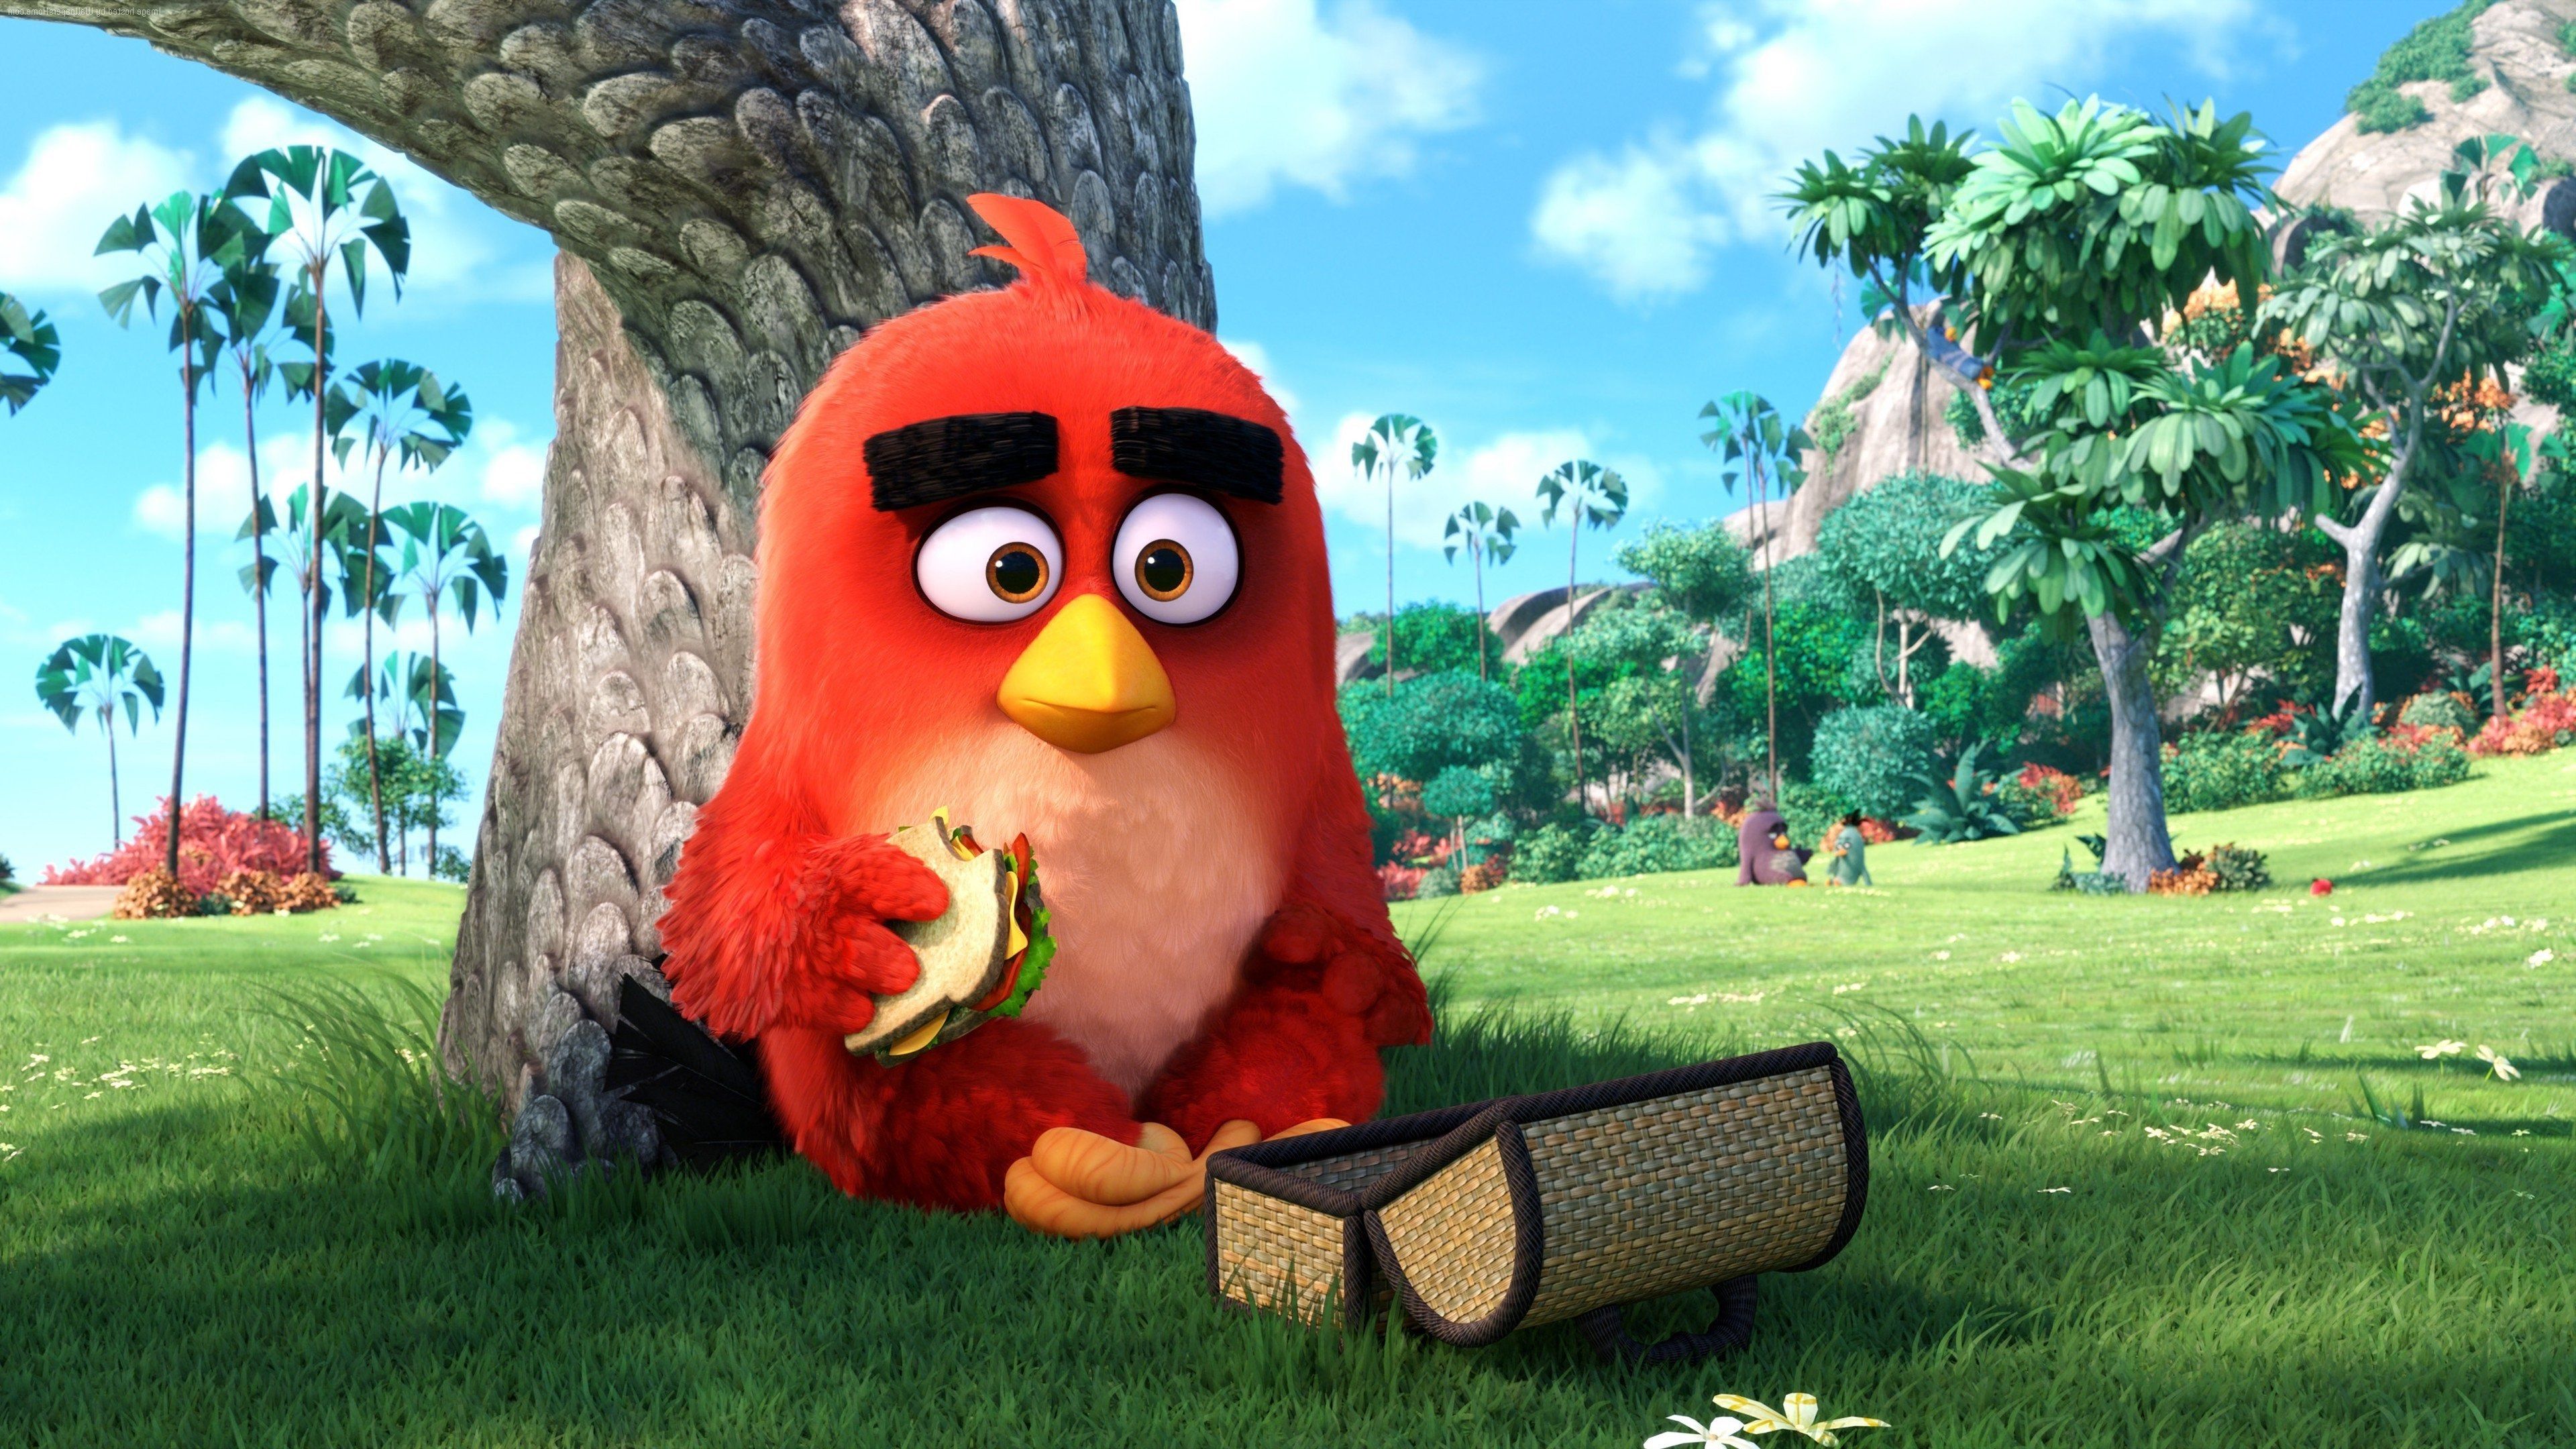 X angry birds k hd wallpaper high defition angry bird pictures angry birds bird wallpaper